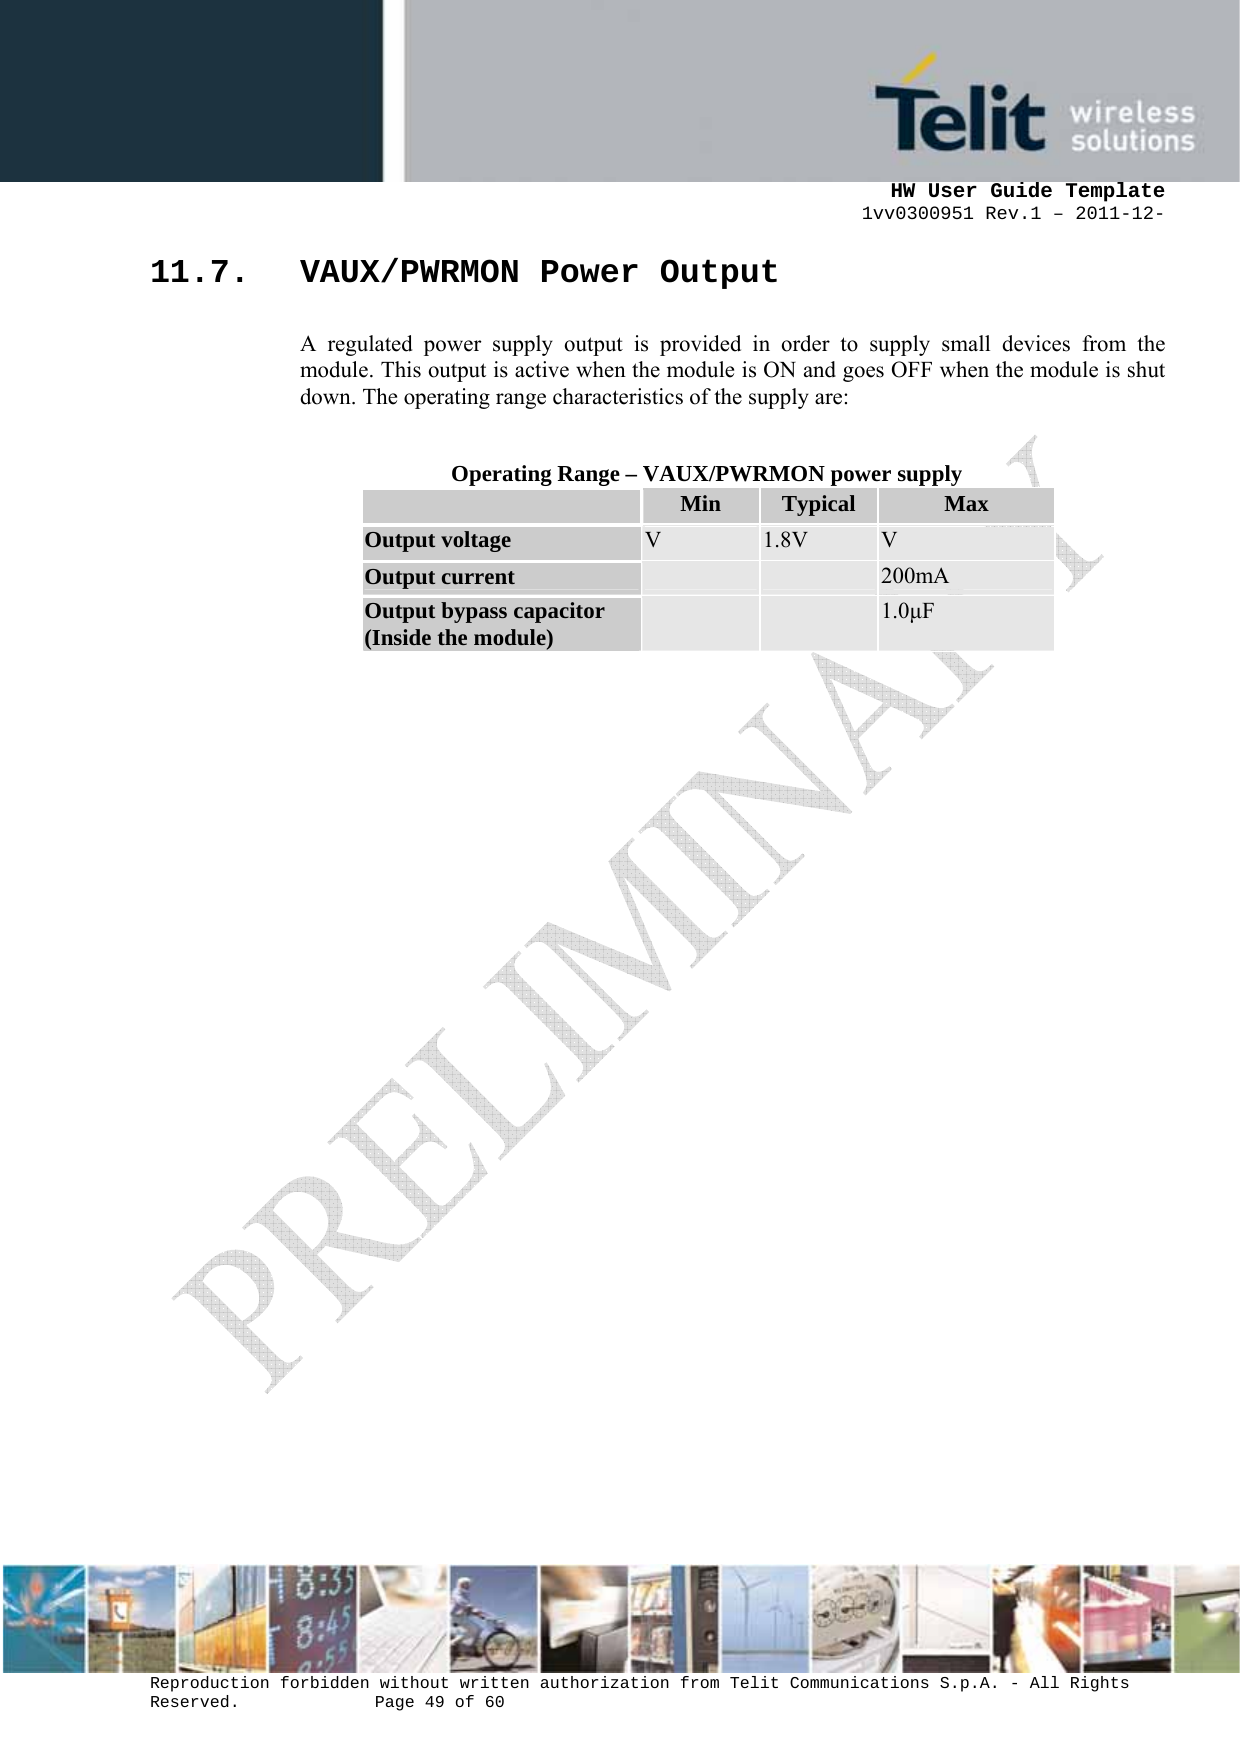      HW User Guide Template 1vv0300951 Rev.1 – 2011-12-  Reproduction forbidden without written authorization from Telit Communications S.p.A. - All Rights Reserved.    Page 49 of 60                                                     11.7. VAUX/PWRMON Power Output A regulated power supply output is provided in order to supply small devices from the module. This output is active when the module is ON and goes OFF when the module is shut down. The operating range characteristics of the supply are:  Operating Range – VAUX/PWRMON power supply  Min  Typical  Max Output voltage  V  1.8V  V Output current    200mA Output bypass capacitor (Inside the module)    1.0µF 